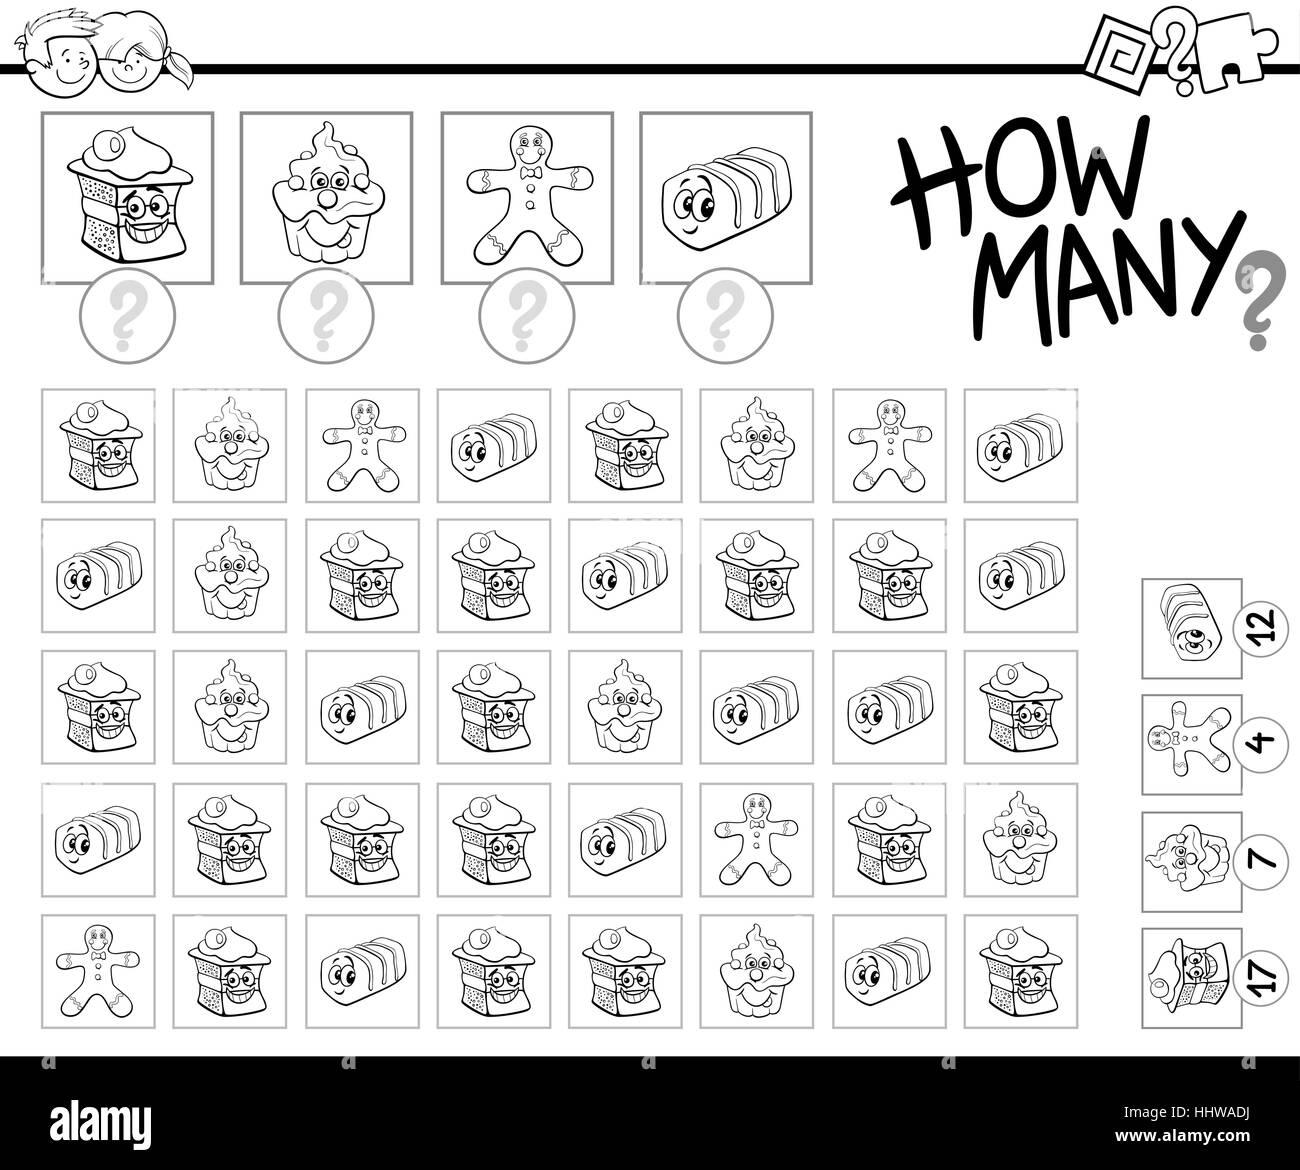 Black and White Cartoon Illustration of Educational How Many Counting Activity for Children with Sweet Food Characters Coloring Page Stock Vector